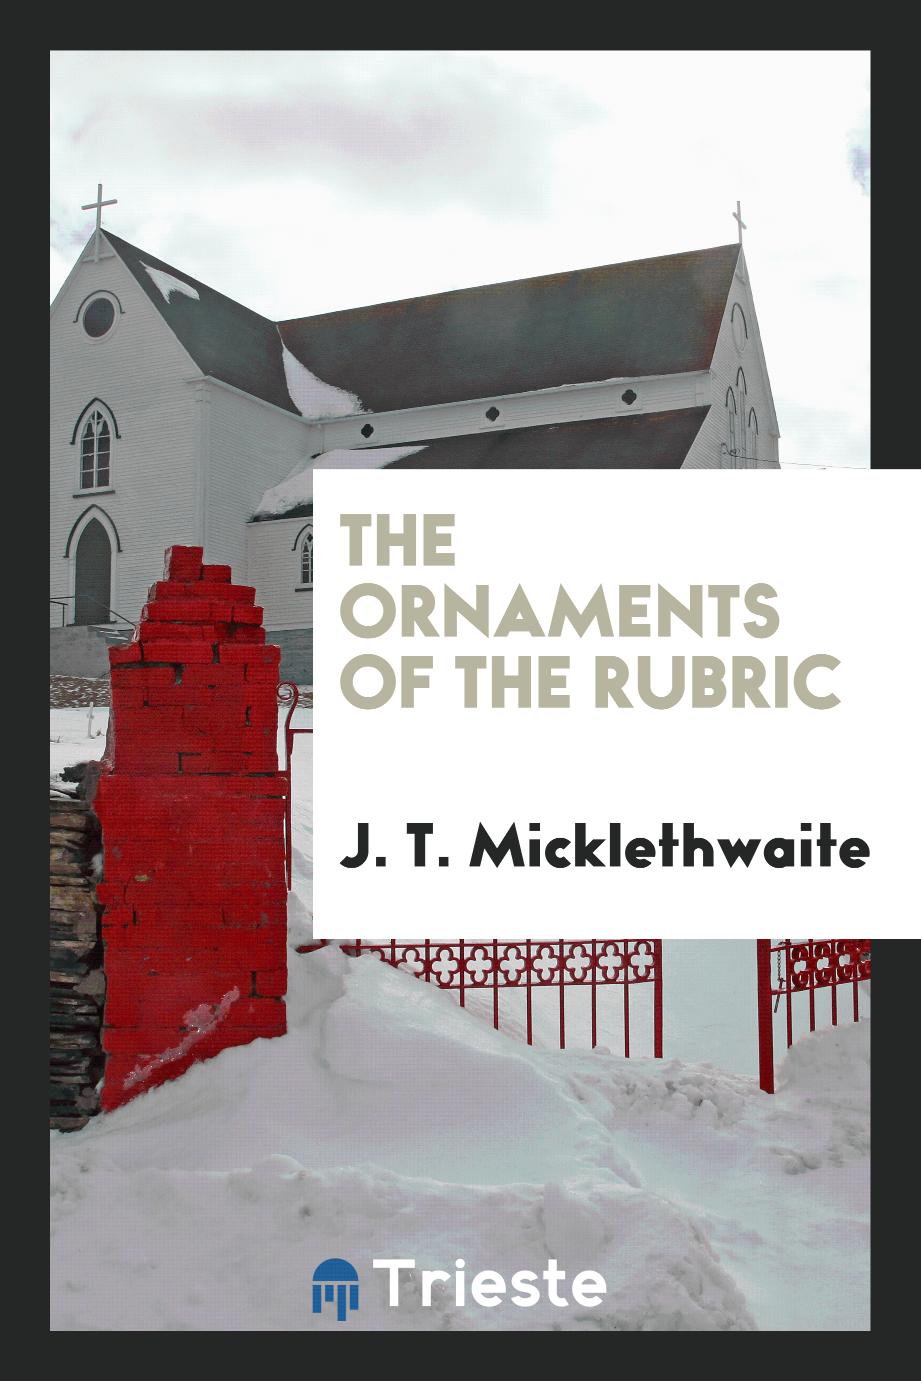 The ornaments of the rubric